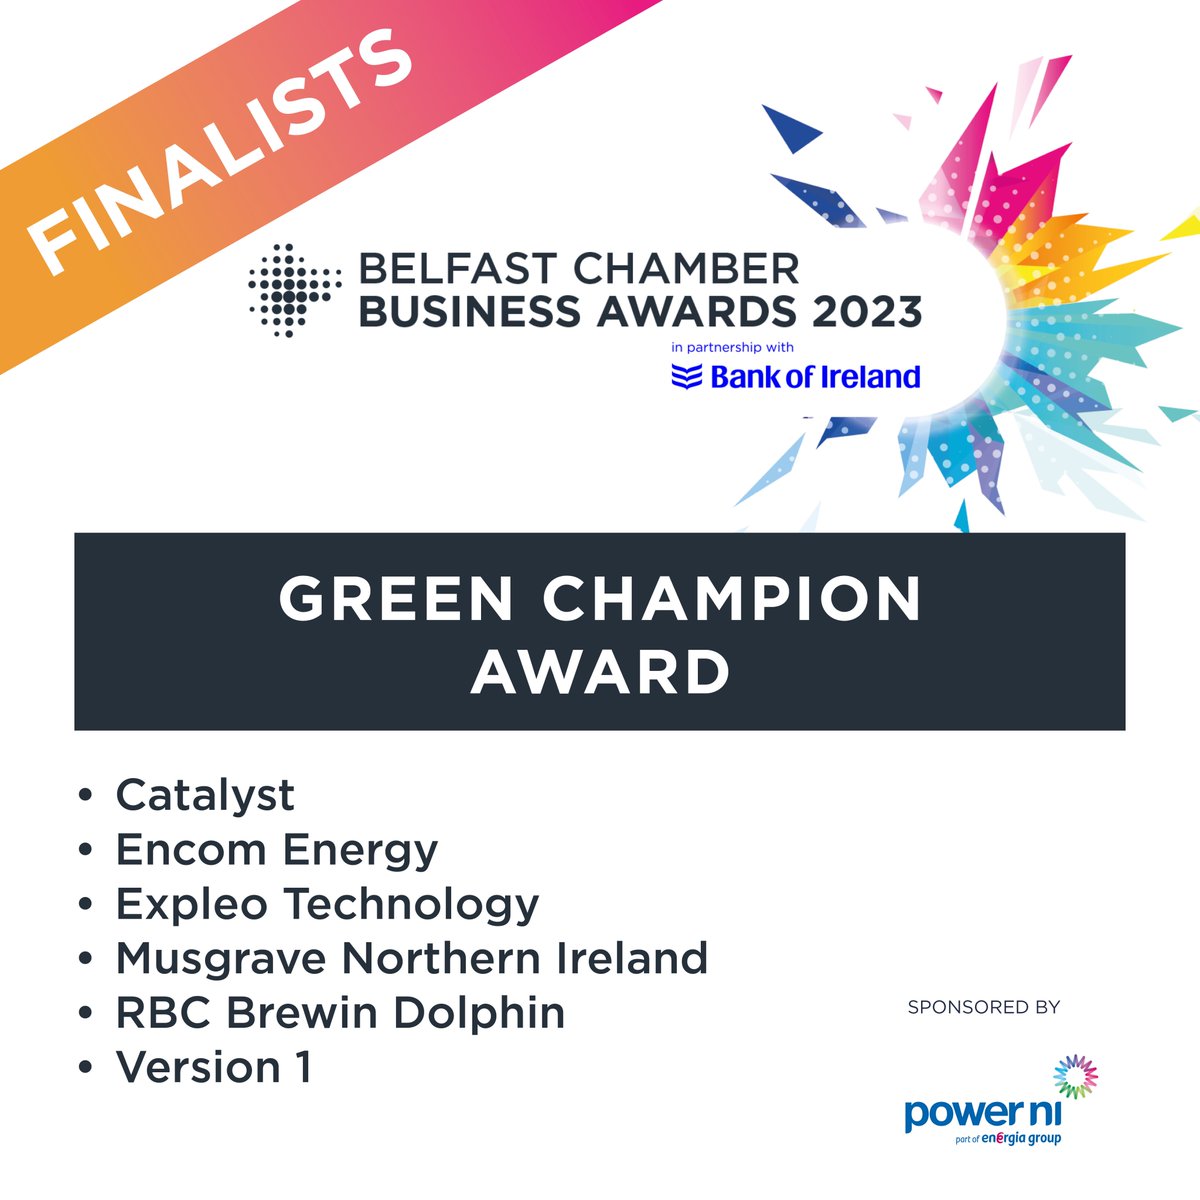 📢 Now we have the 'GREEN CHAMPION AWARD' with our category sponsors @PowerNI. The finalists are;
•Catalyst
•Encom Energy
•Expleo Technology
•Musgrave Northern Ireland
•RBC Brewin Dolphin
•Version 1
😍Good luck to all! #belfastchamber #belfast #belfastchamberbusinessawards